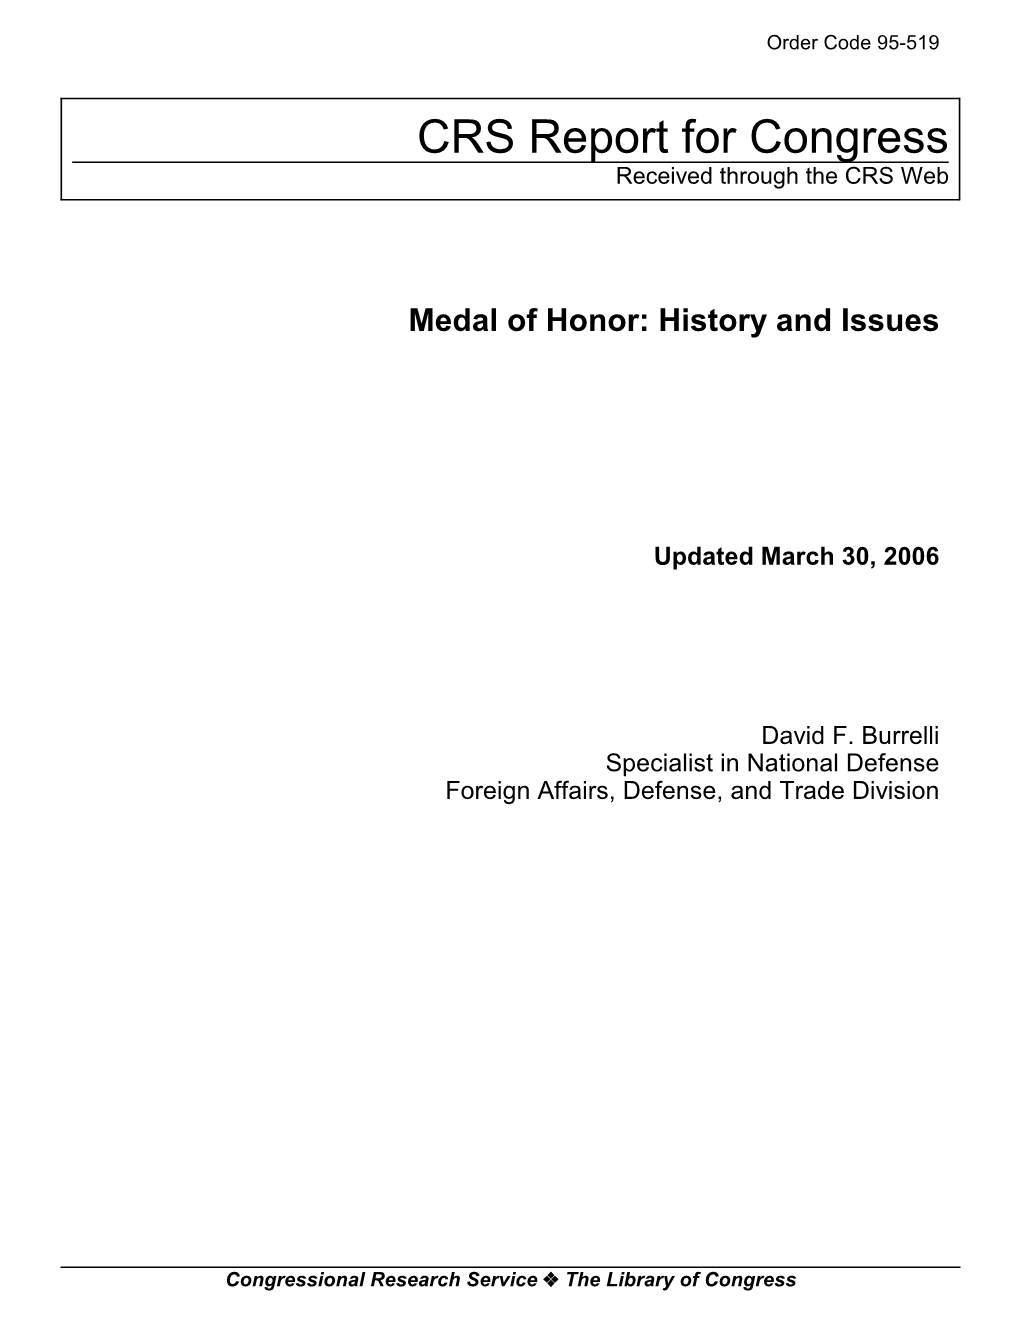 Medal of Honor: History and Issues